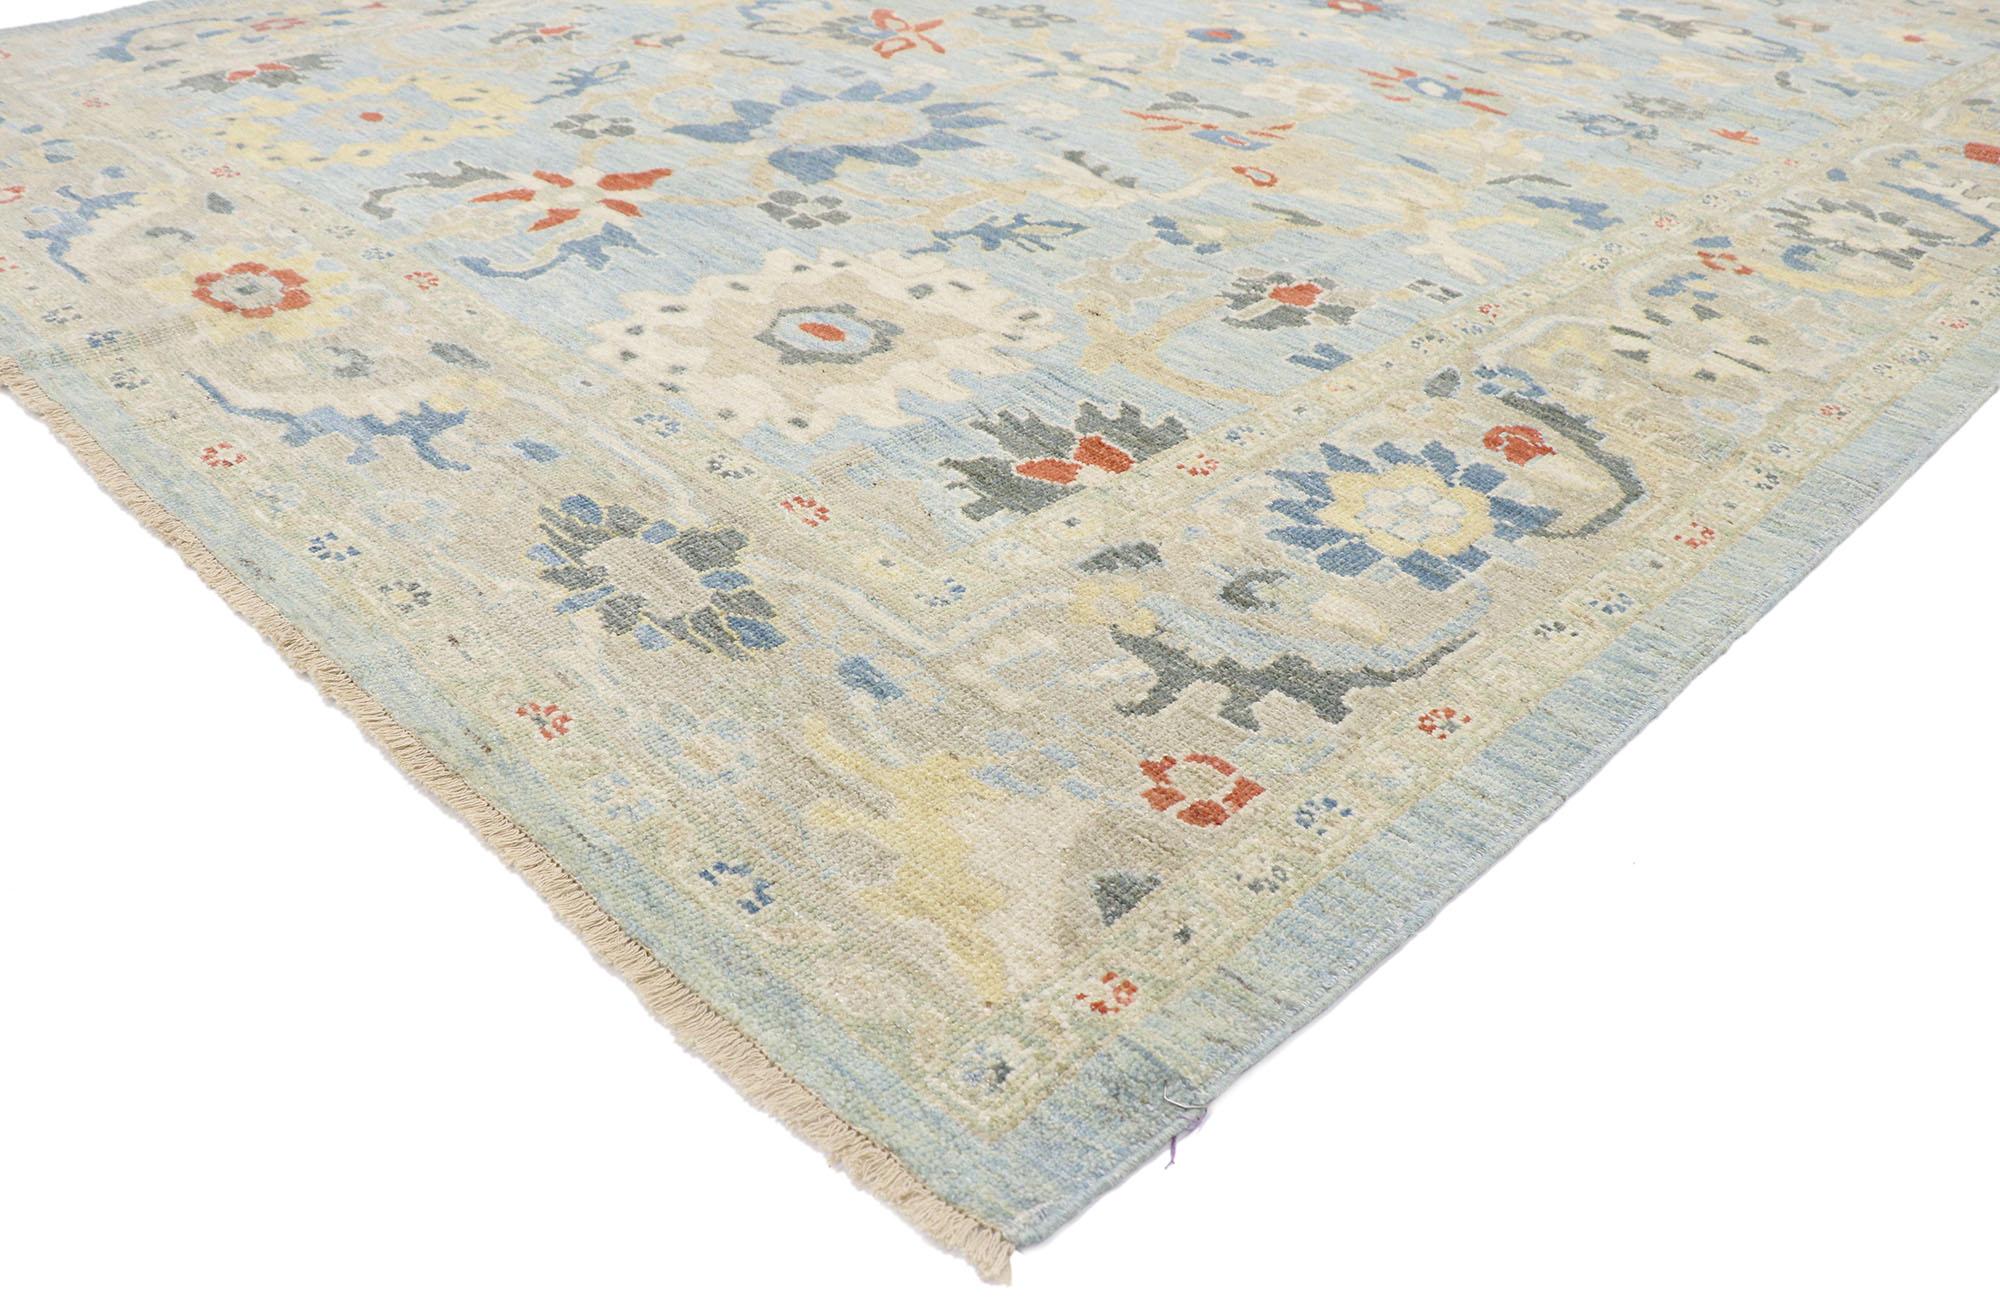 60867 Modern Turkish Persian Sultanabad Rug, 08'08 x 11'09. Embark on a captivating journey where Biophilic Design seamlessly merges with timeless allure, unveiling the exquisite beauty of a hand-knotted wool Turkish Persian Sultanabad rug. A